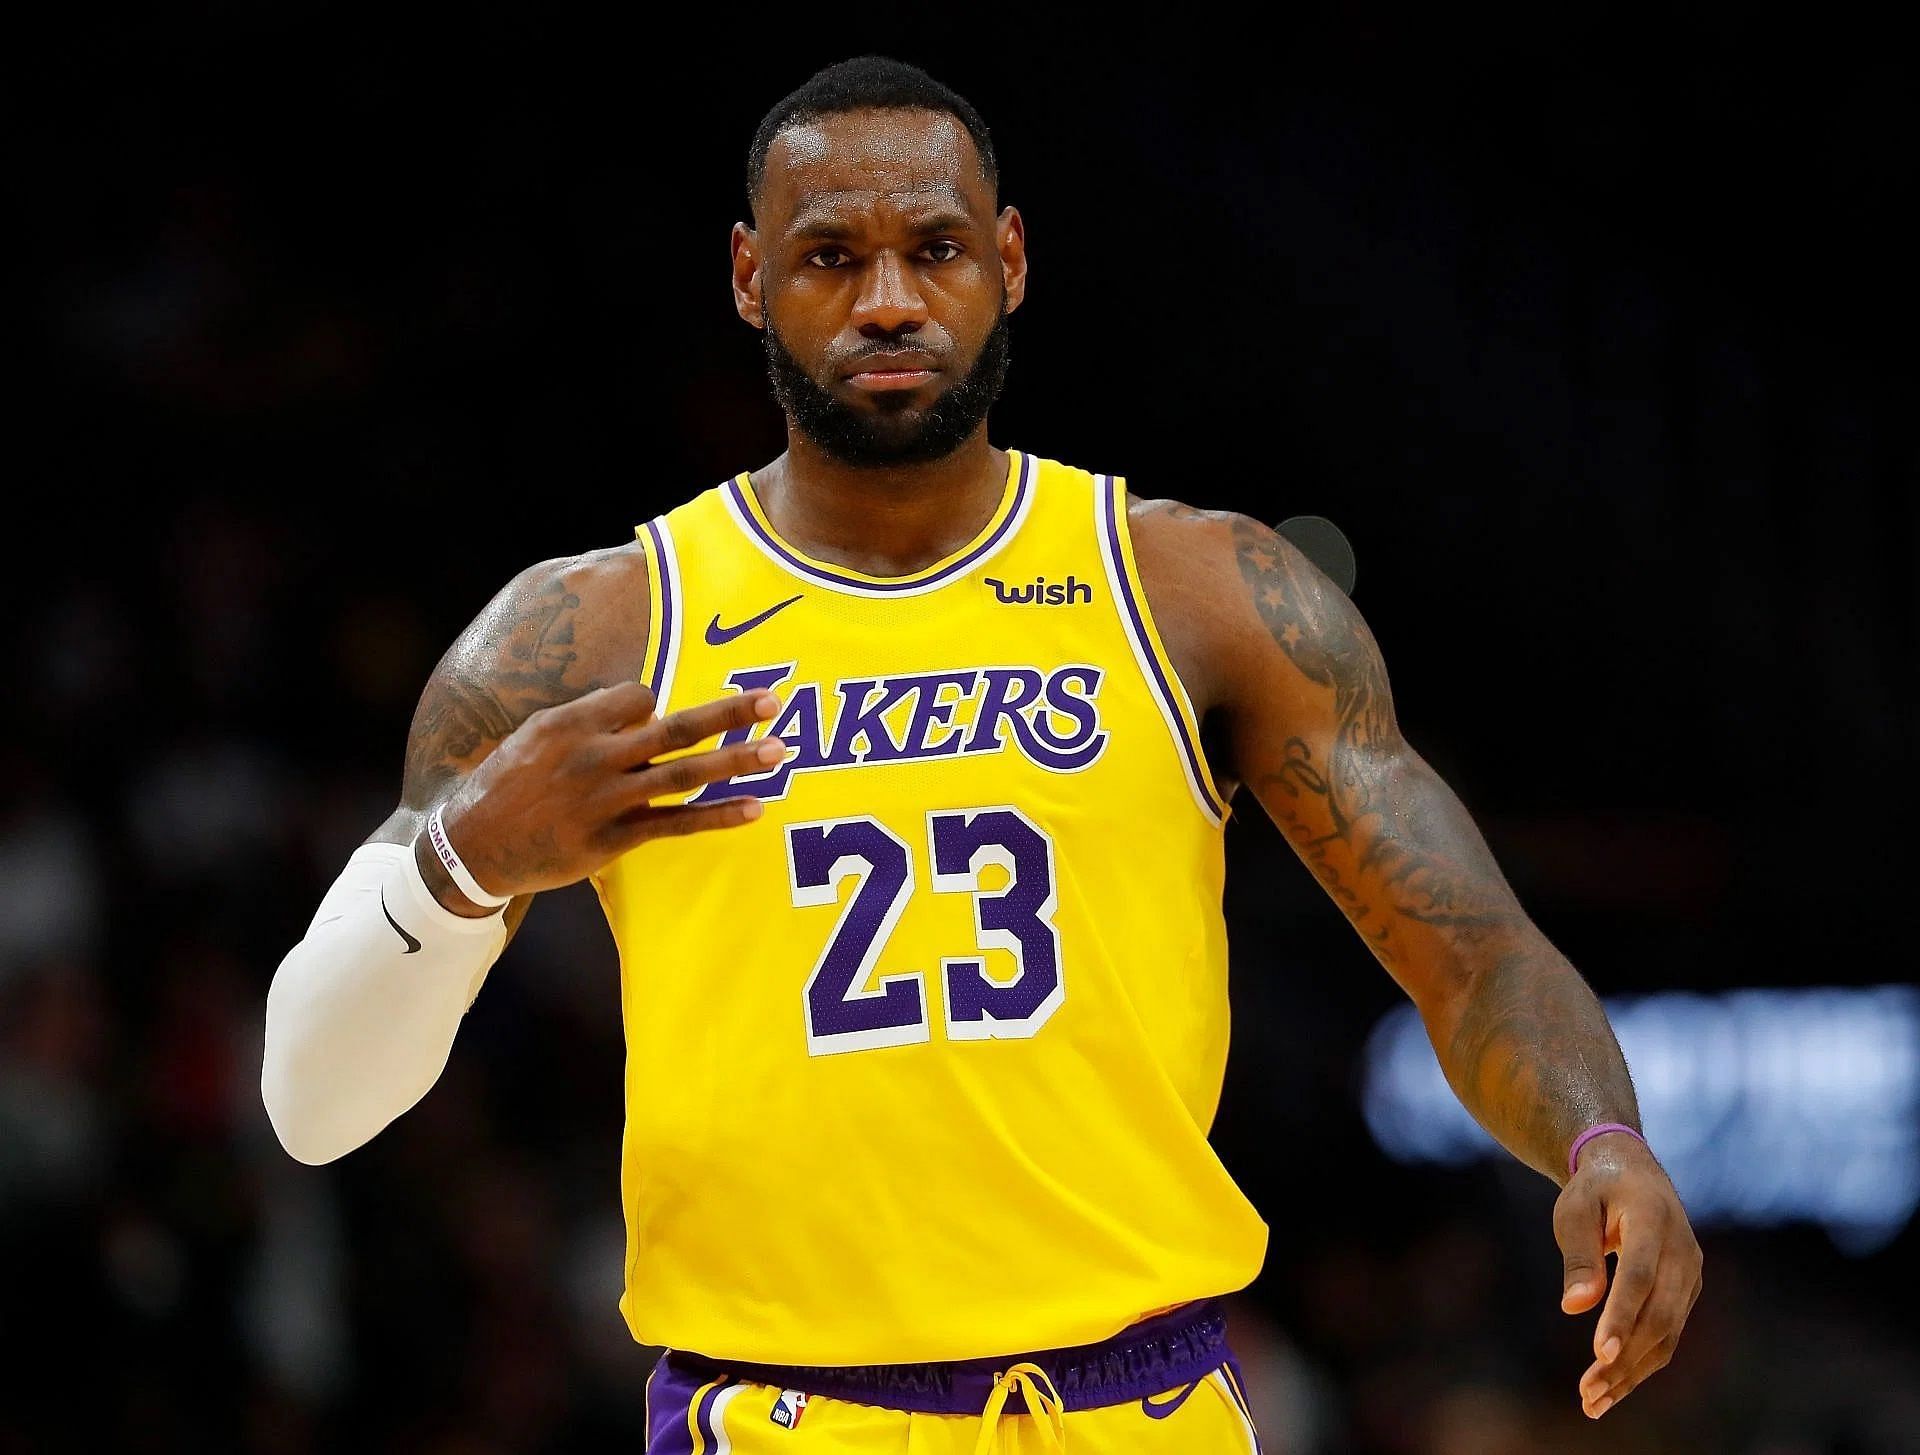 LeBron James is not suiting up for the Los Angeles Lakers&rsquo; preseason game against the Golden State Warriors on October 7.